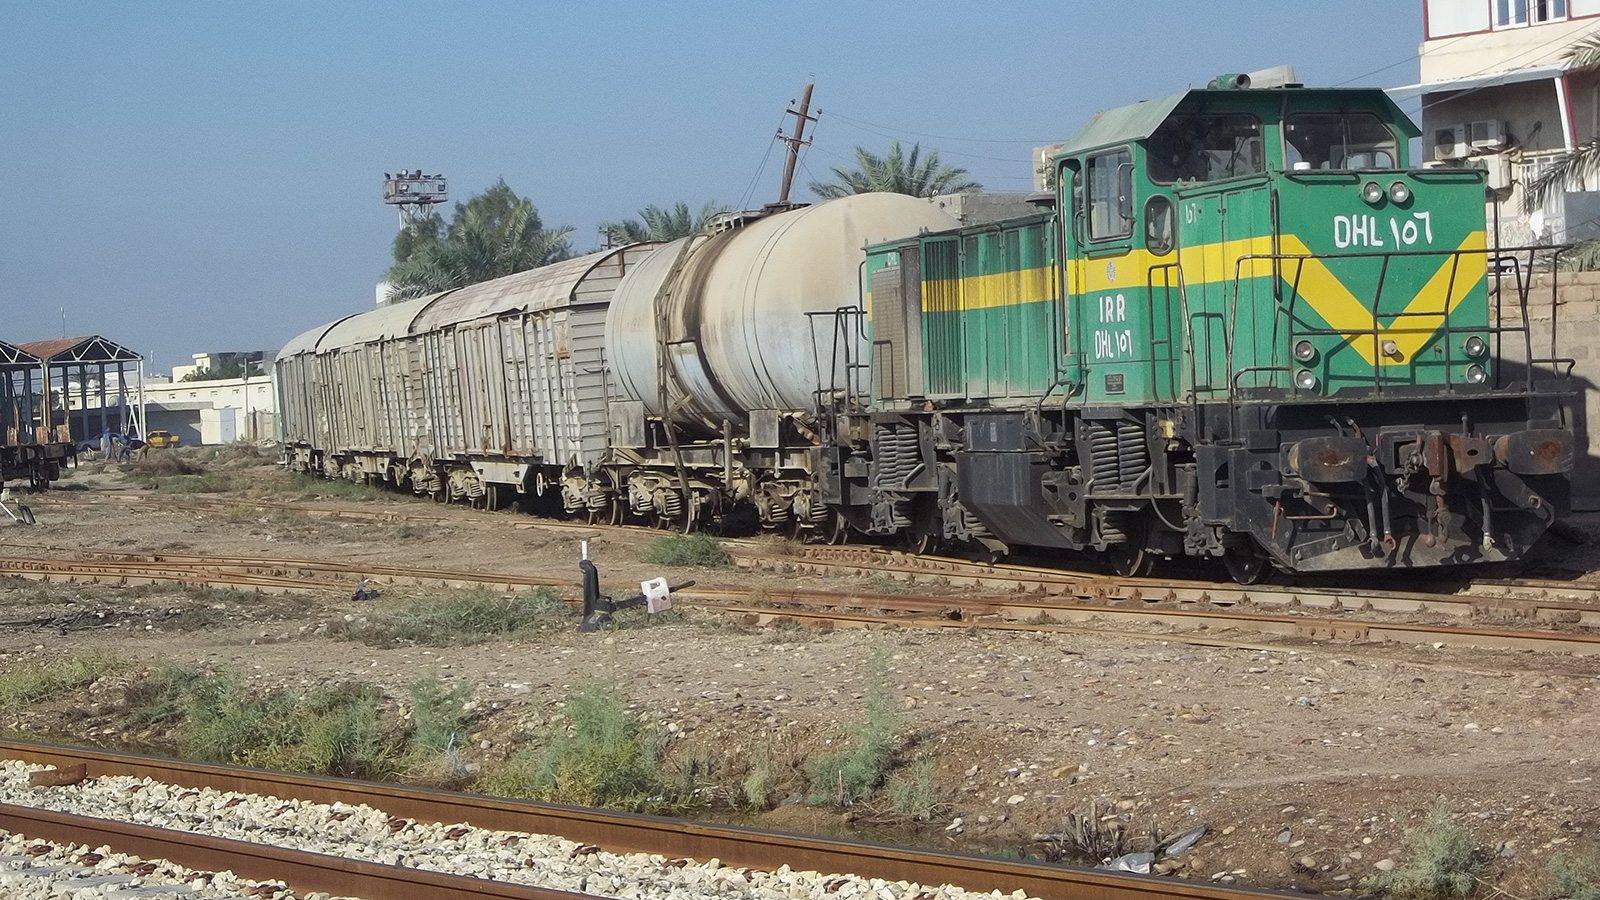 Iraq: Railways with Iran and Kuwait are not on the table right now